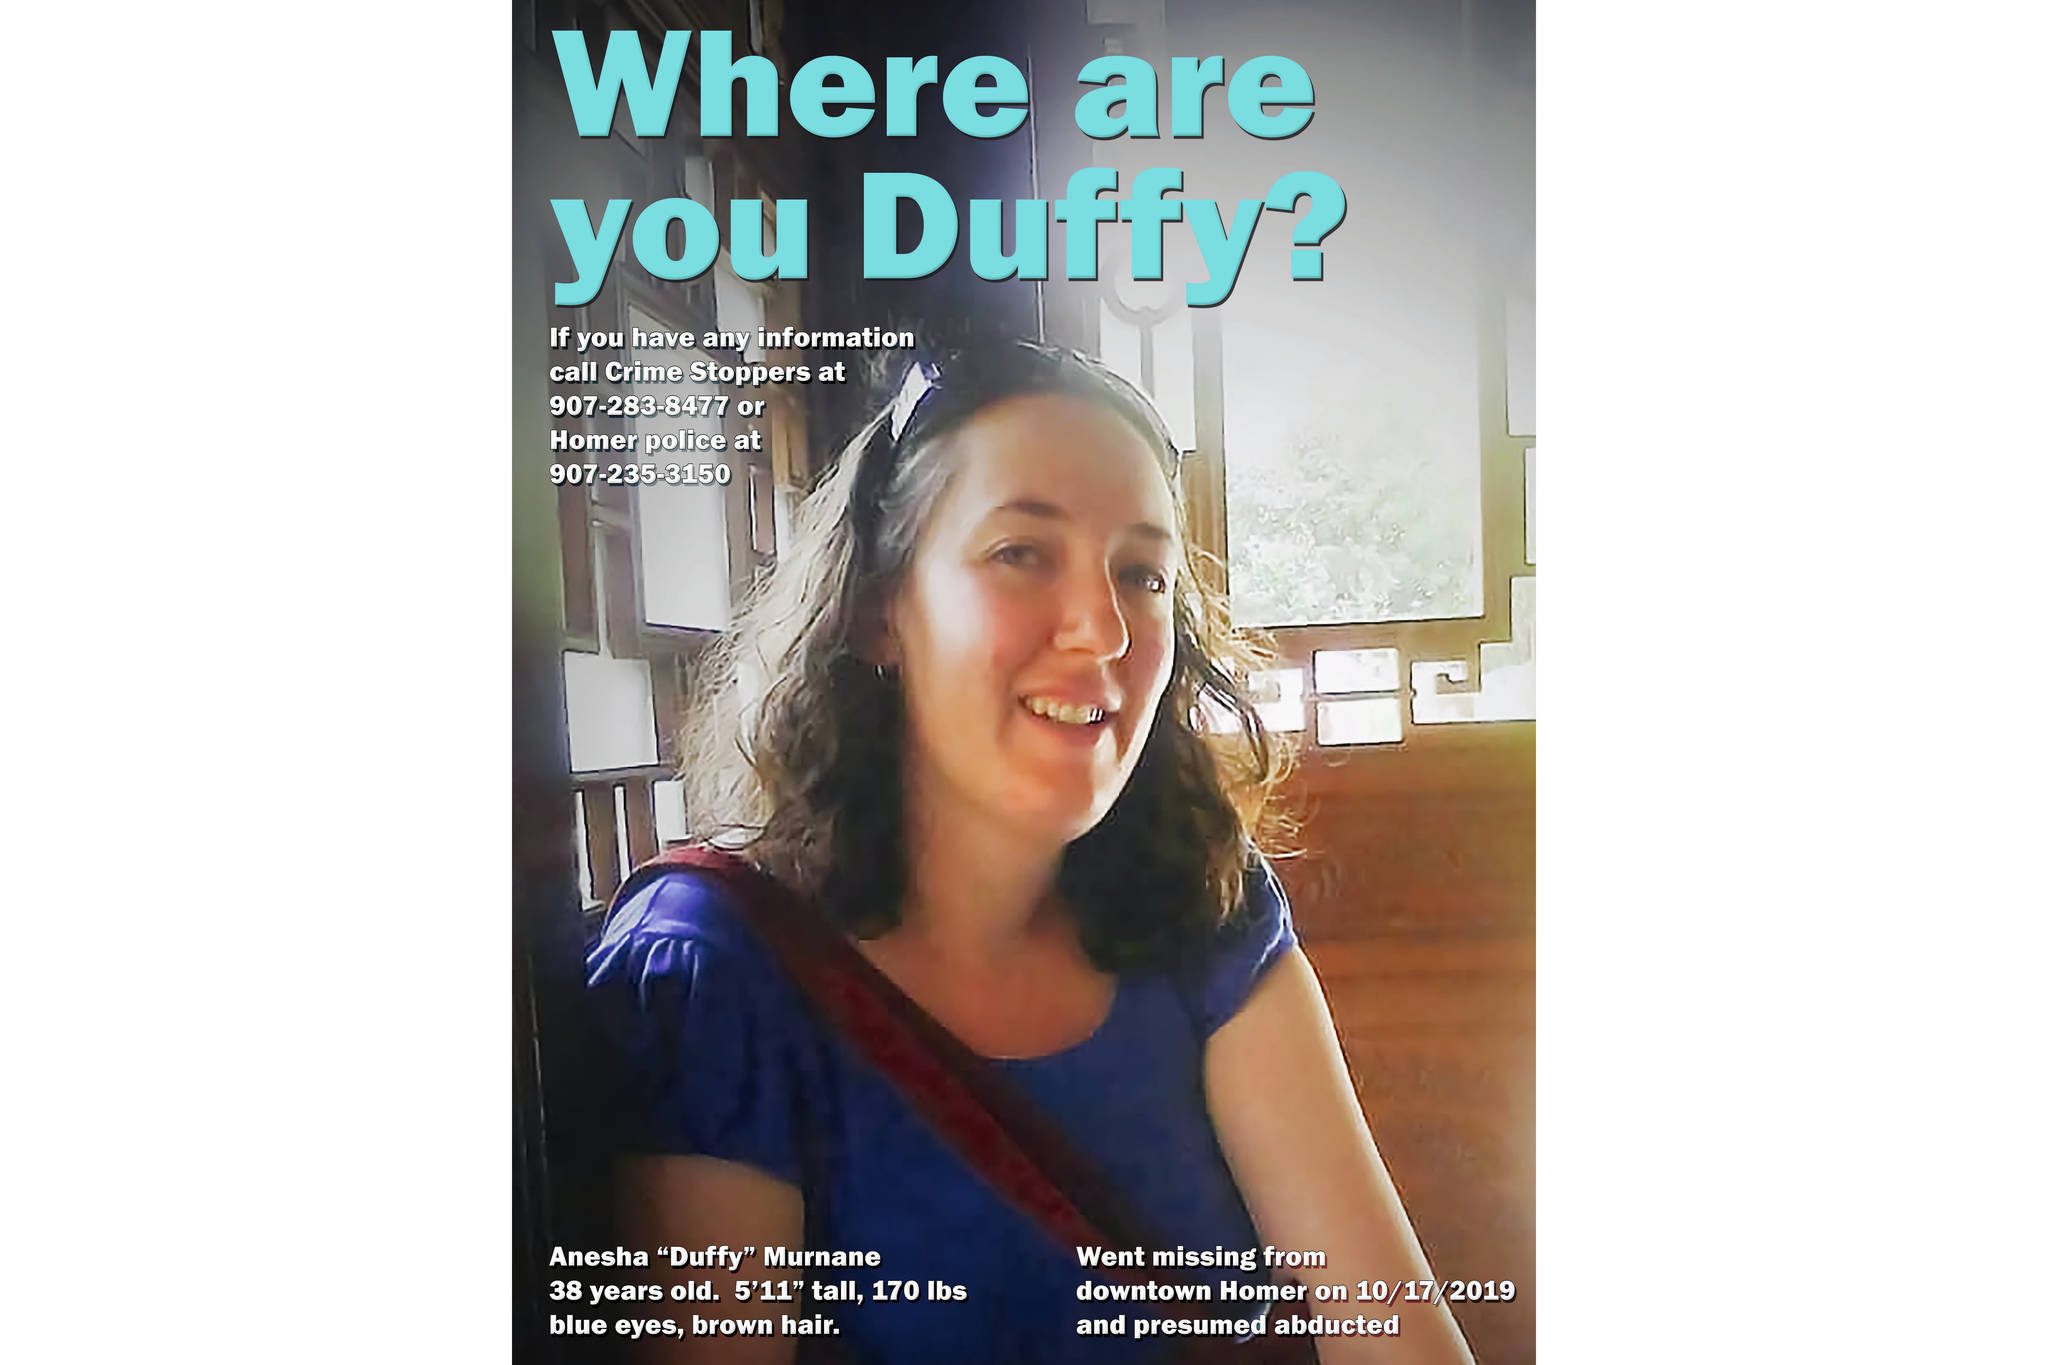 A new poster seeking information on the whereabouts of Anesha "Duffy" Murnane produced on Oct. 12, 2020, in Homer, Alaska, will go up at Two Sisters Bakery in Homer. (Photo courtesy Anesha Murnane family)